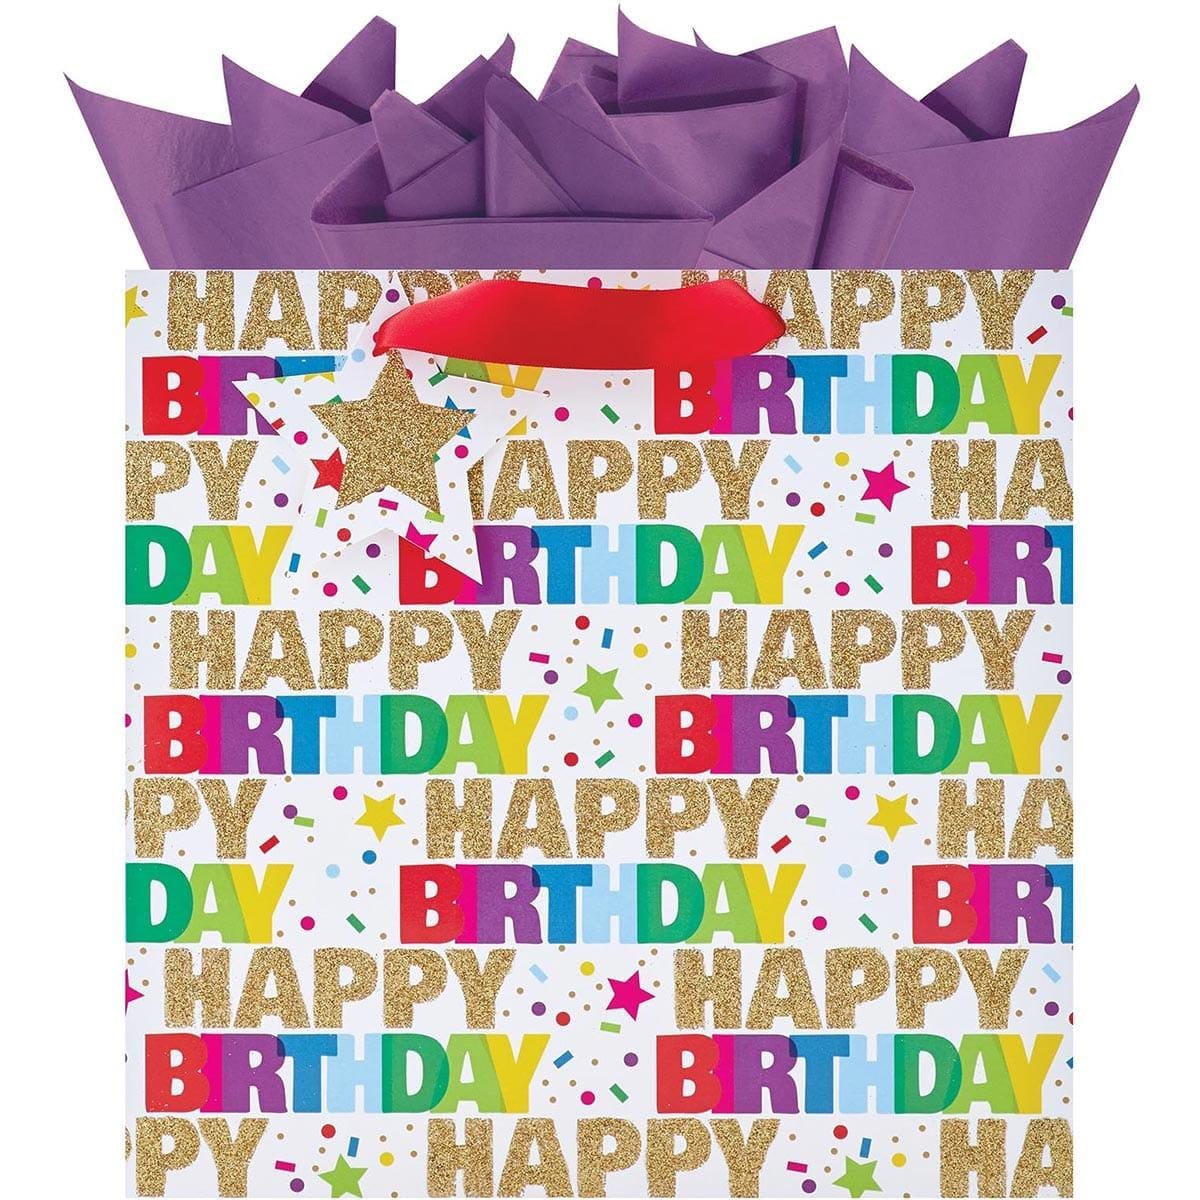 Buy Gift Wrap & Bags Gift Bag Medium 9.75 In. - Sparkling Celebration sold at Party Expert